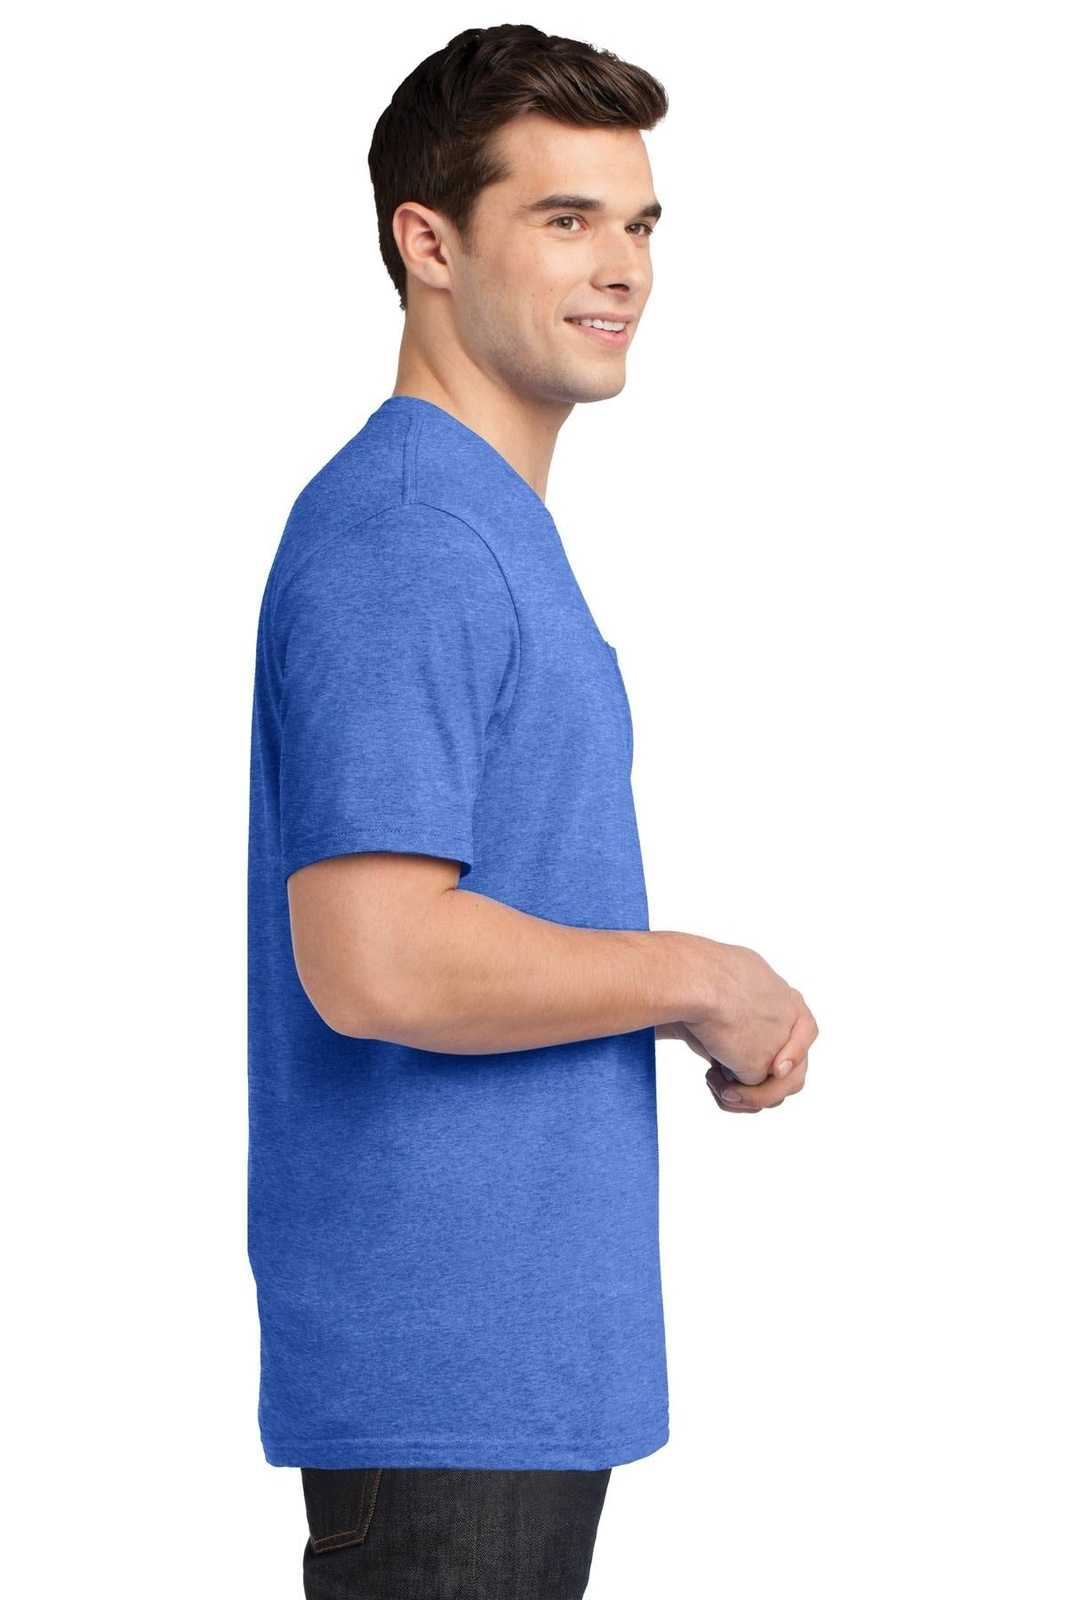 District DT6000P Very Important Tee with Pocket - Heathered Royal - HIT a Double - 3